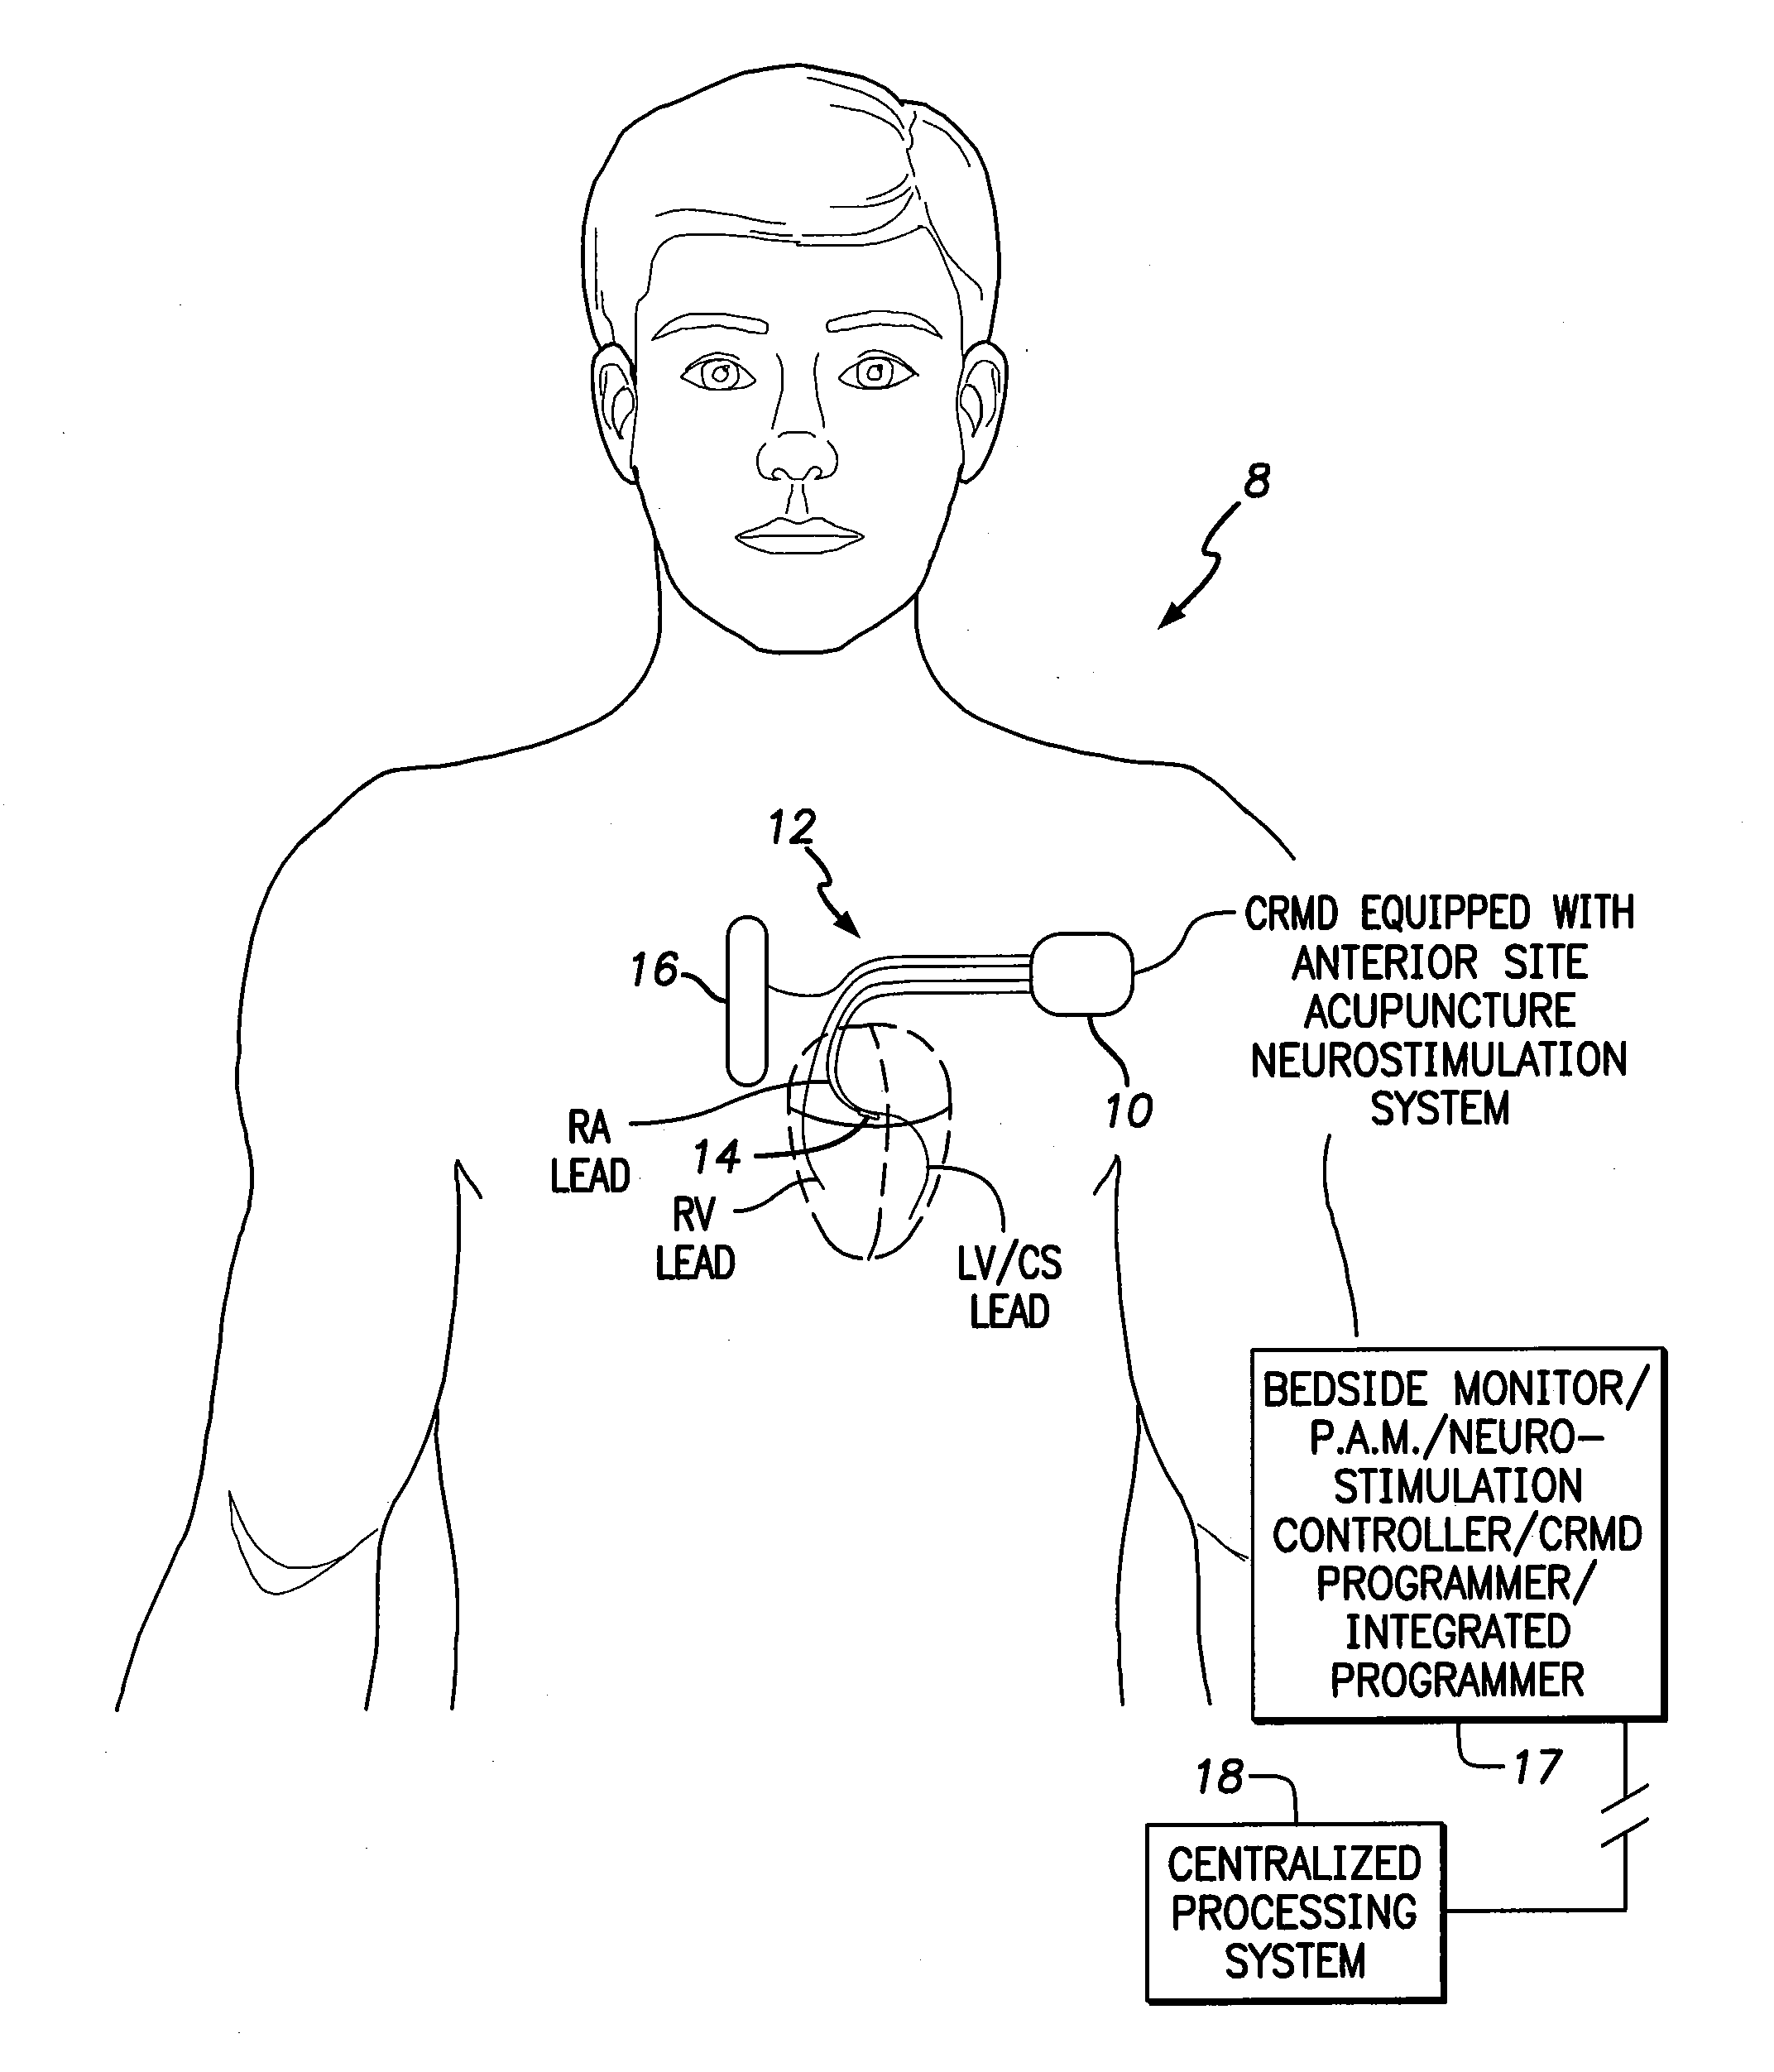 Systems and methods for controlling neurostimulation of acupuncture sites using an implantable cardiac rhythm management device